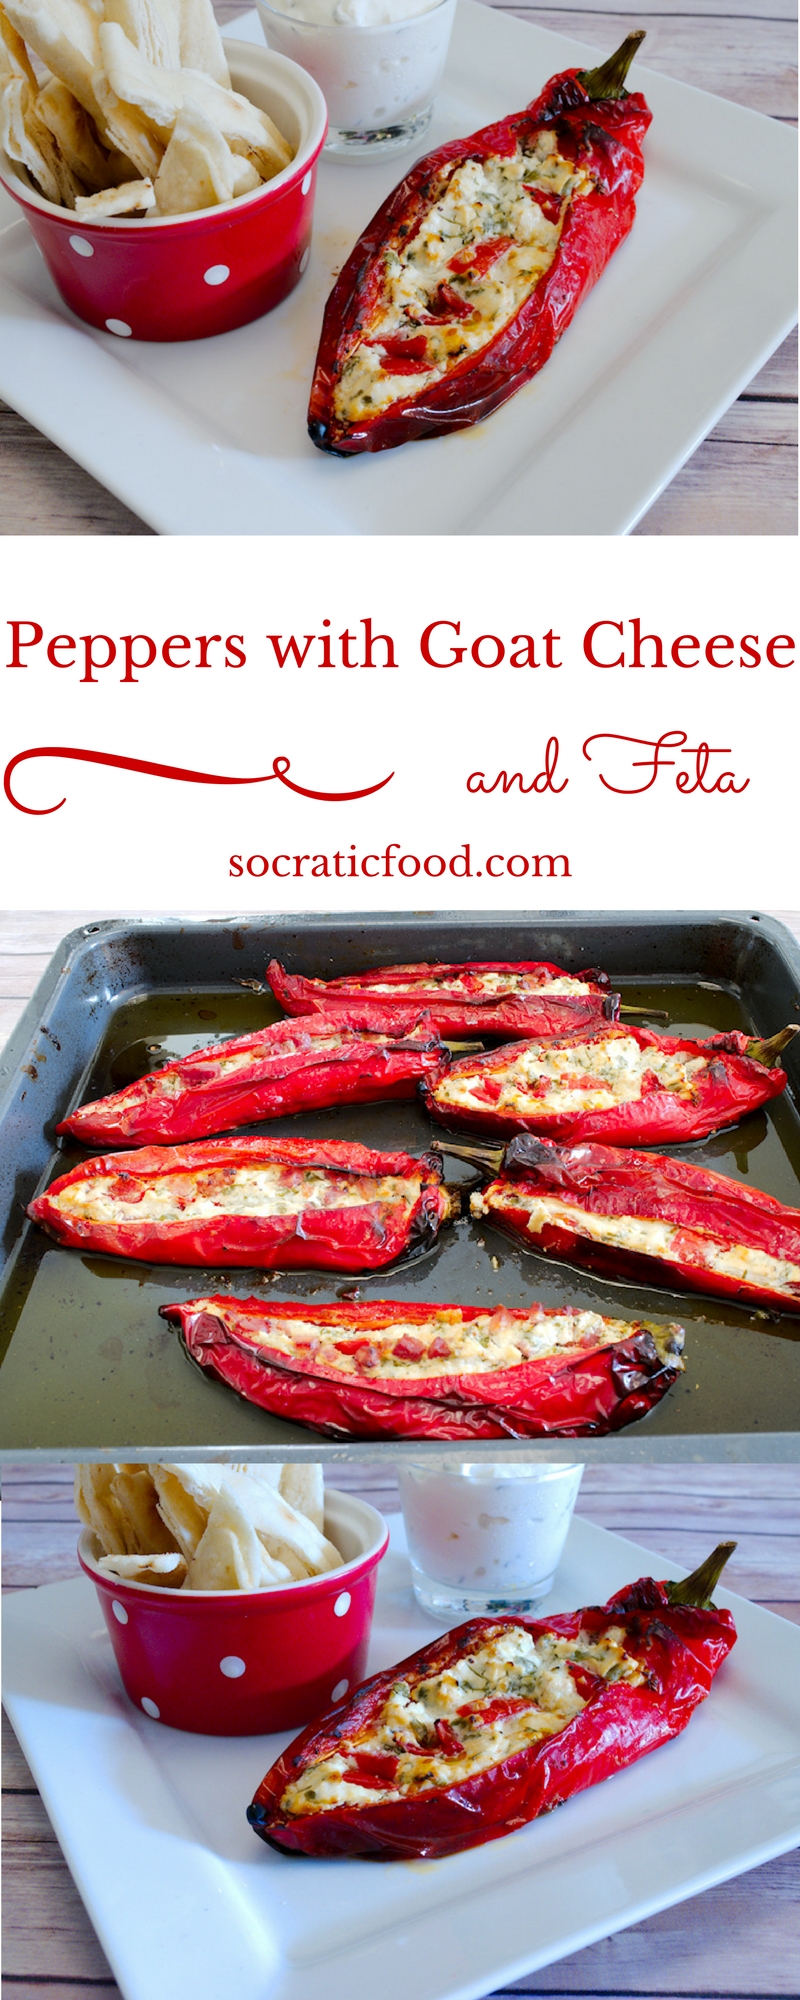 Grilled Peppers with Goat Cheese and Feta